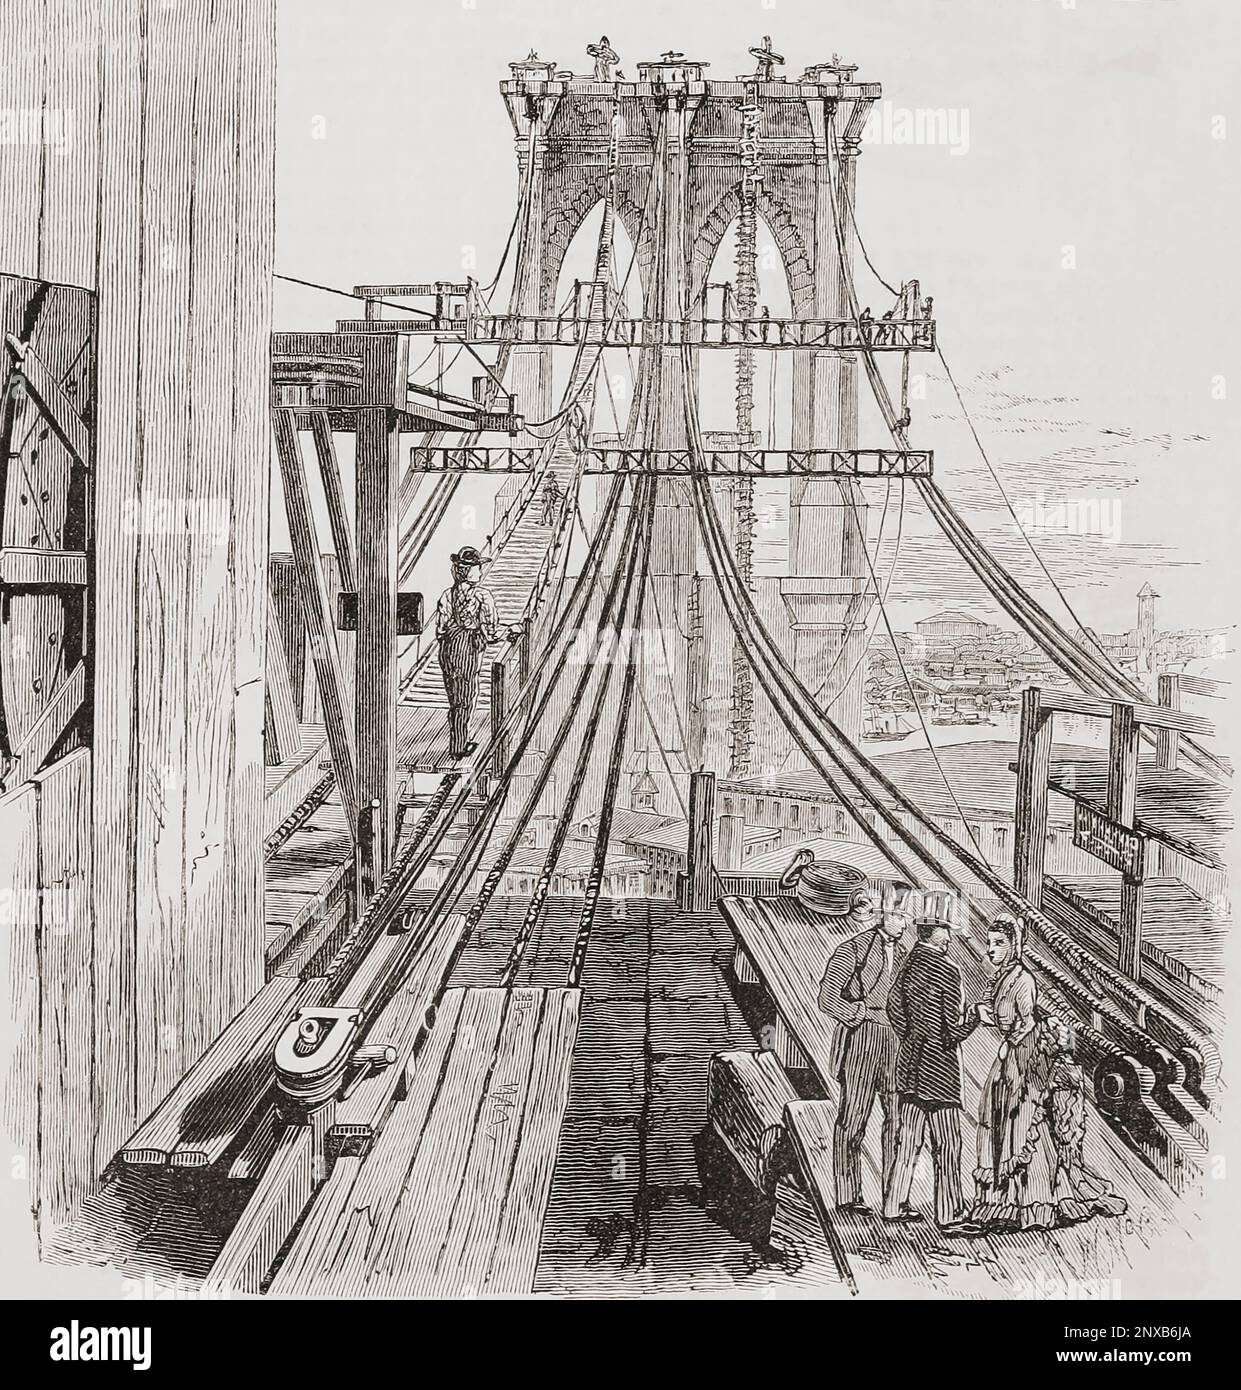 Brooklyn Bridge under construction.  Brooklyn Bridge was built between 1870 and 1883.  After an illustration in Appletons' Cyclopaedia of Applied Mechanics, published 1880. Stock Photo